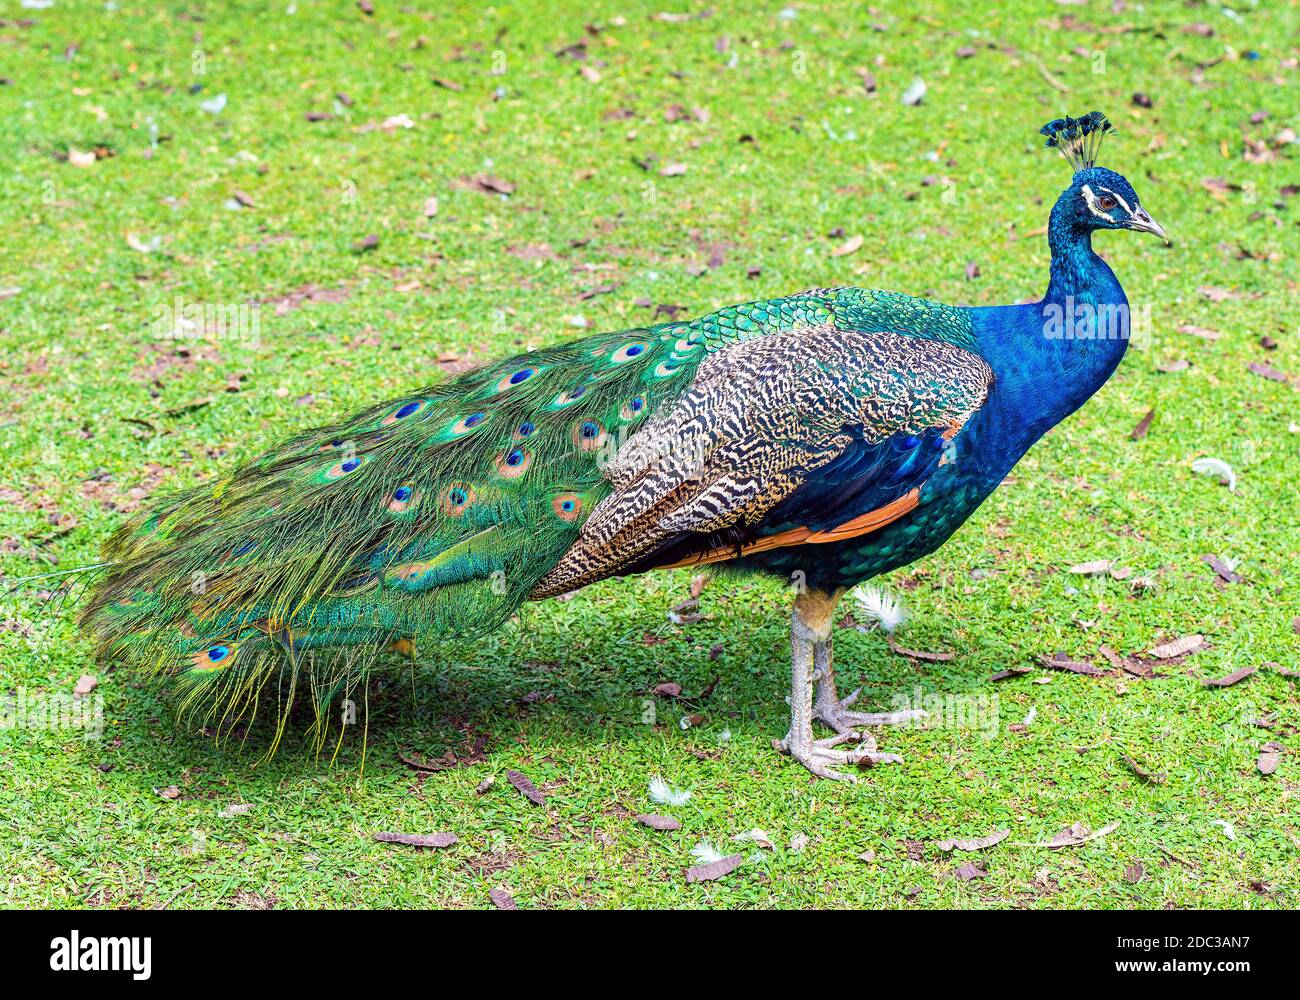 Portrait of a male Indian Peafowl or Peacock (Pavo cristatus) in the grass. Stock Photo